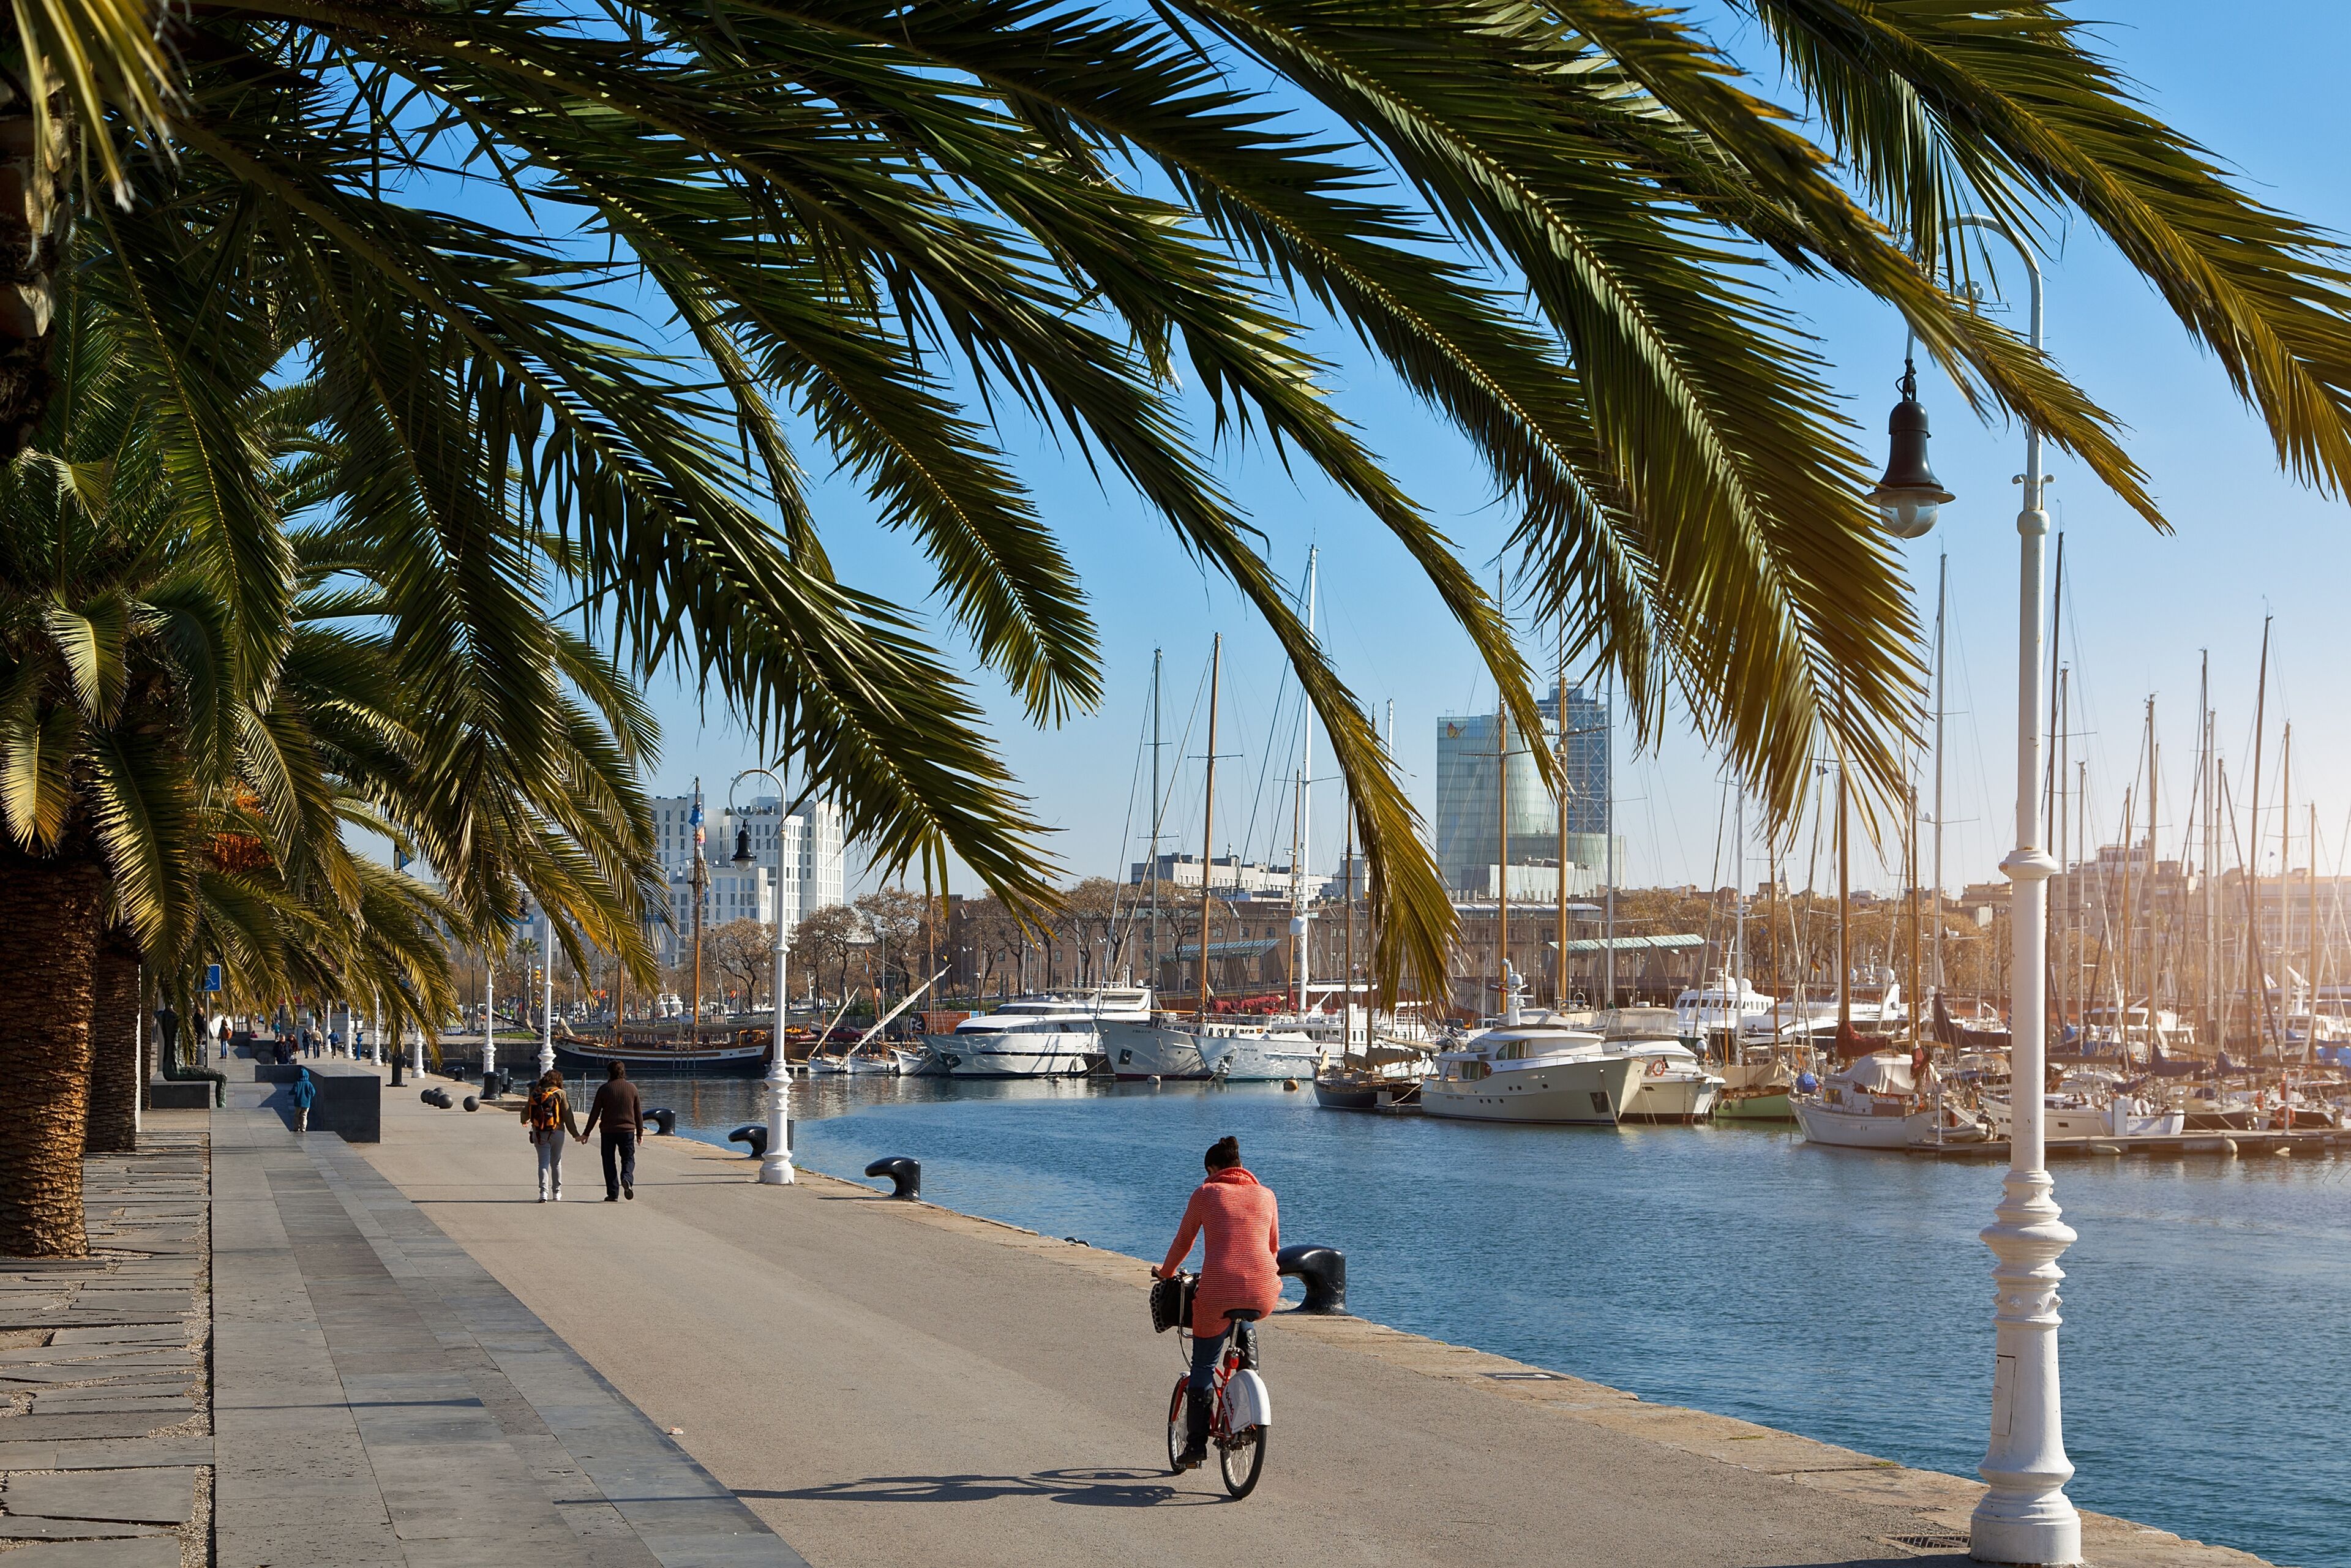 A cyclist and pedestrians enjoy a sunny day on a promenade lined with palm trees, overlooking a marina filled with boats and yachts.